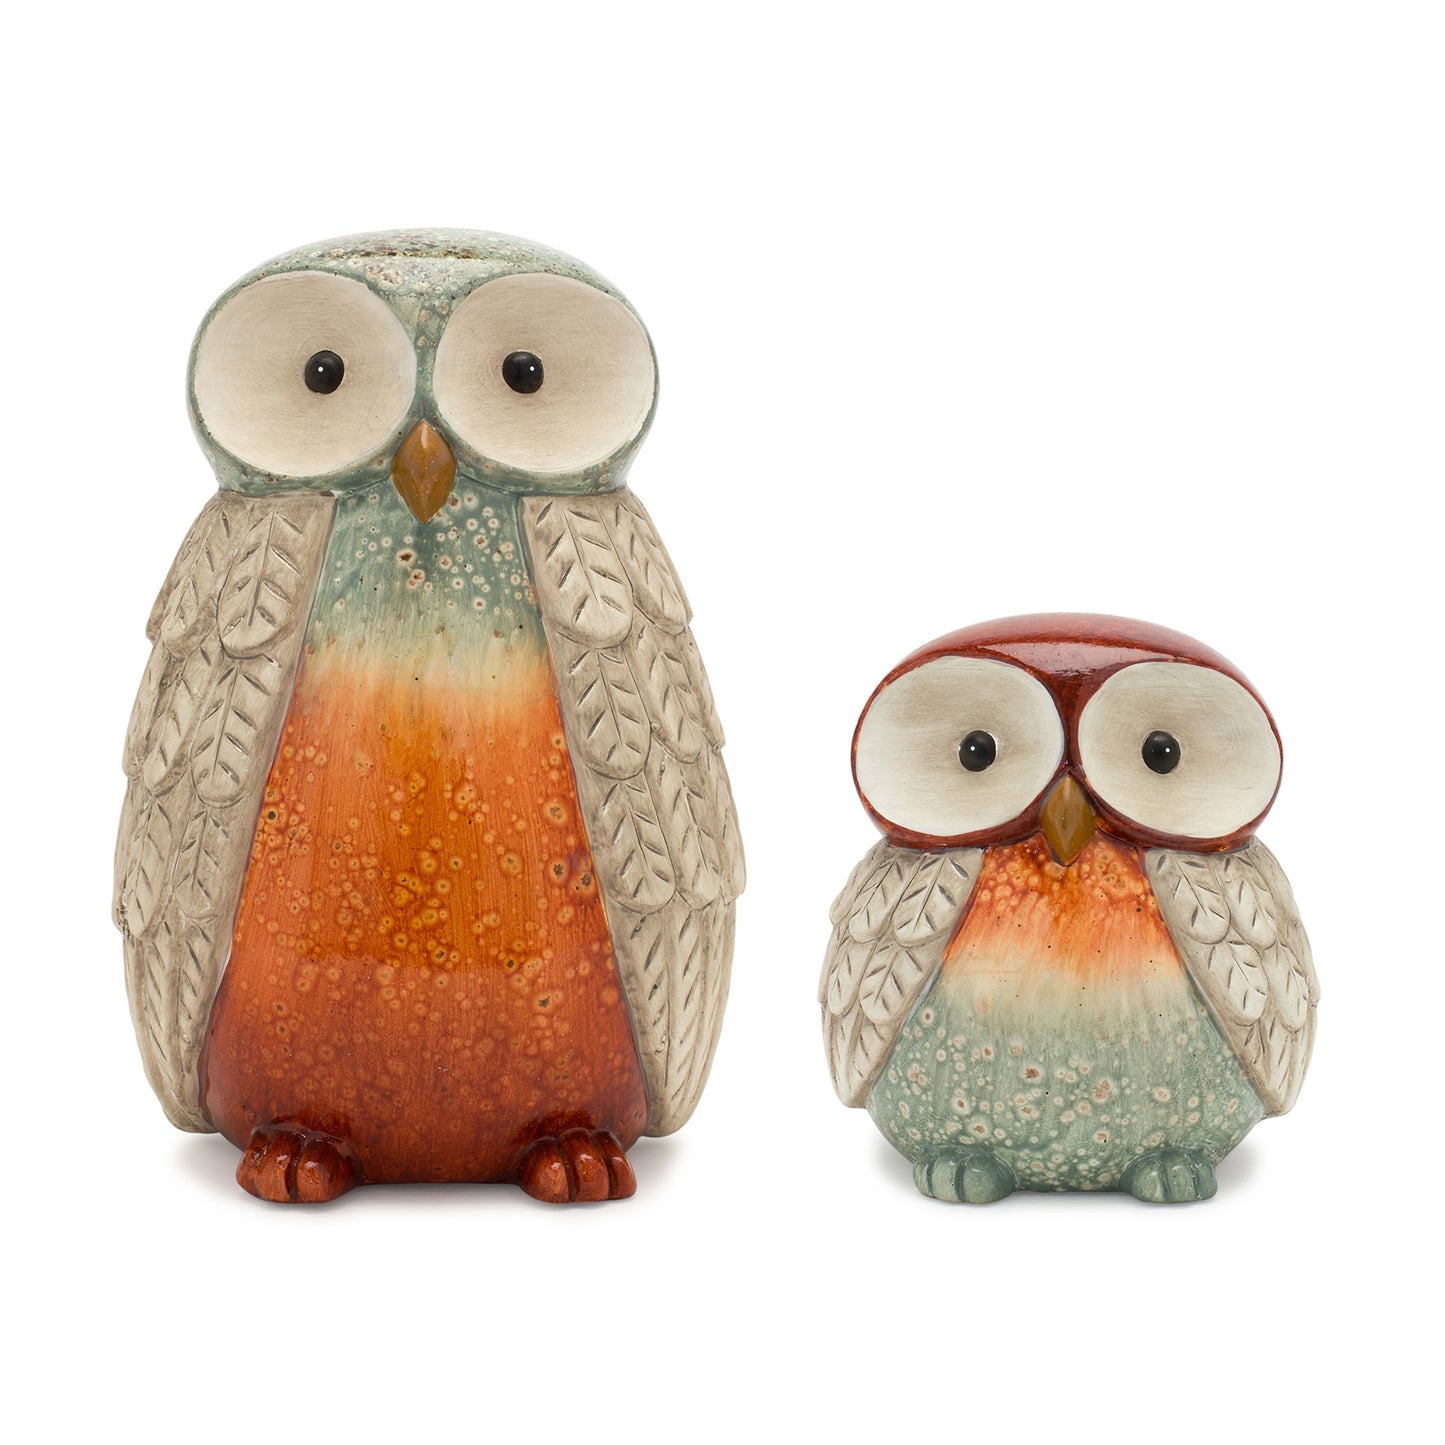 Terra cotta owl figurine with glazed accents, Featuring two sizes, this set is sure to add a whimsical touch to your fall decor. The trendy orange and green color scheme paired with the wide-eyed design is the perfect combination to create a stunning fall display. 